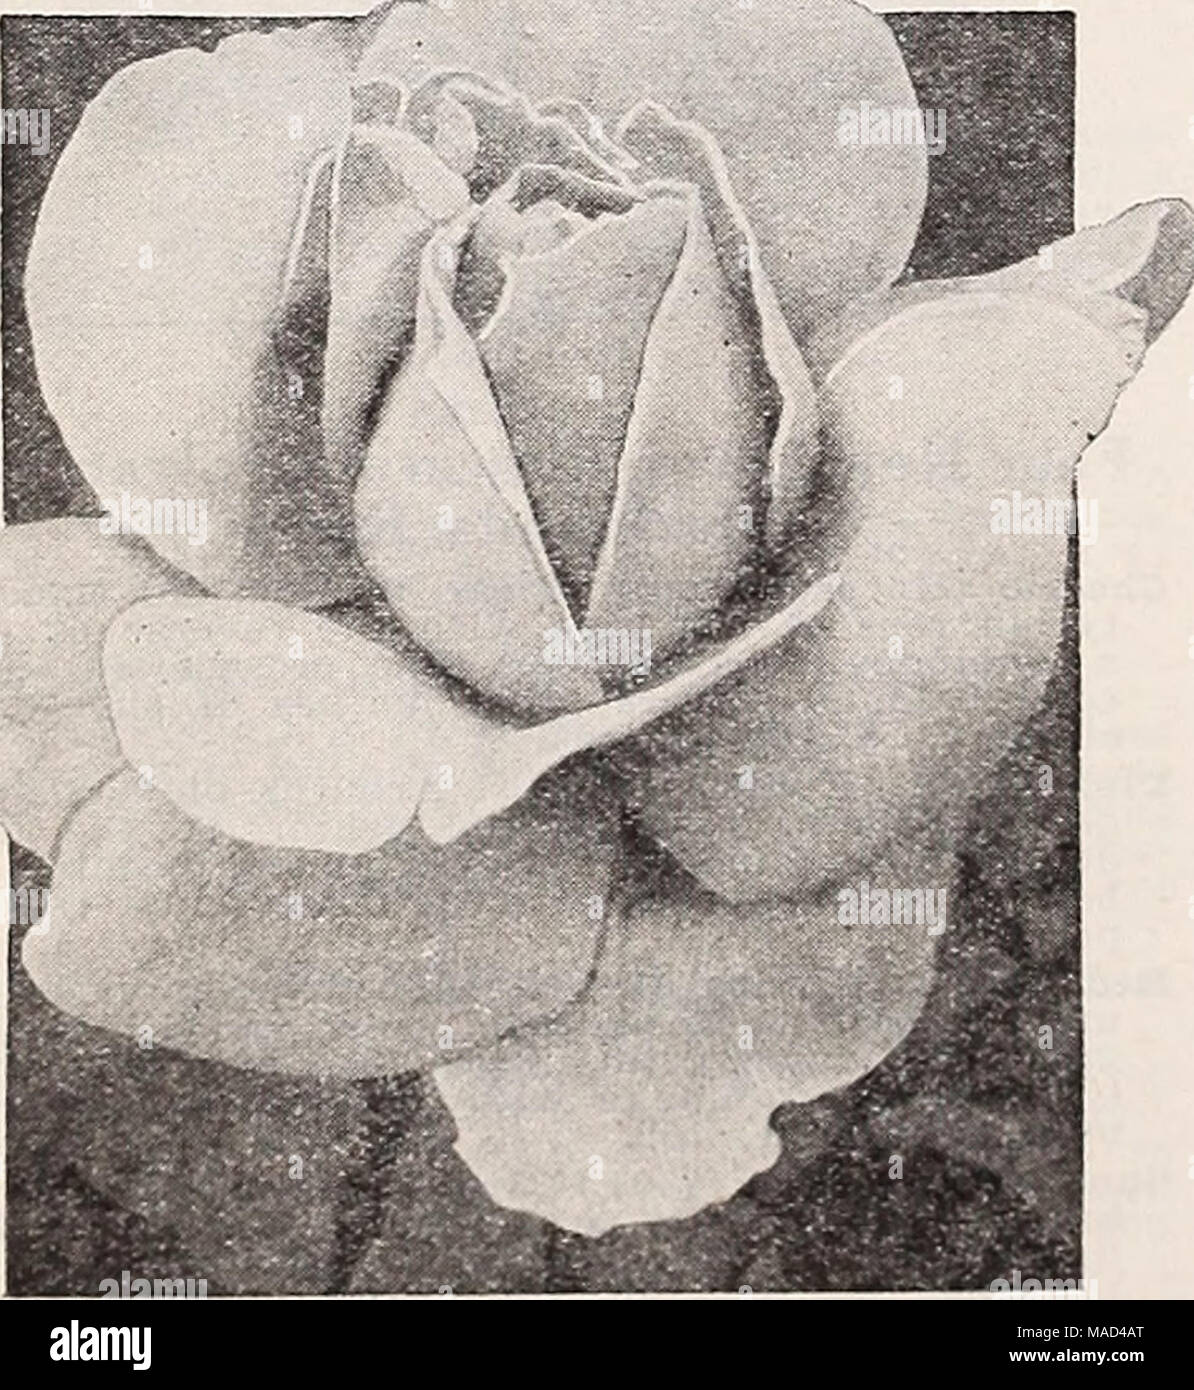 . Dreer's wholesale catalog for florists and market gardeners : autumn 1941 edition . Salmon, Apricot &amp; Copper—cont. Mme. Edouard Herriot. Moderately fragrant coral-red blooms shaded yellow and light scarlet. $30.00 per 100. Mrs. Sam McGredy. Glistening scarlet-copper-orange, shaded red on outside. $30.00 per 100. Pink &amp; Rose Briarcliff. Fragrant brilliant rose-pink center shading lighter at the outer petals. $30.00 per 100. Dainty Bess. A magnificent large single of a delicate shell pink color. Crimson stamens. $30.00 per 100. Same Edith Helen. Substantial Rose-du-Barri pink flowers w Stock Photo